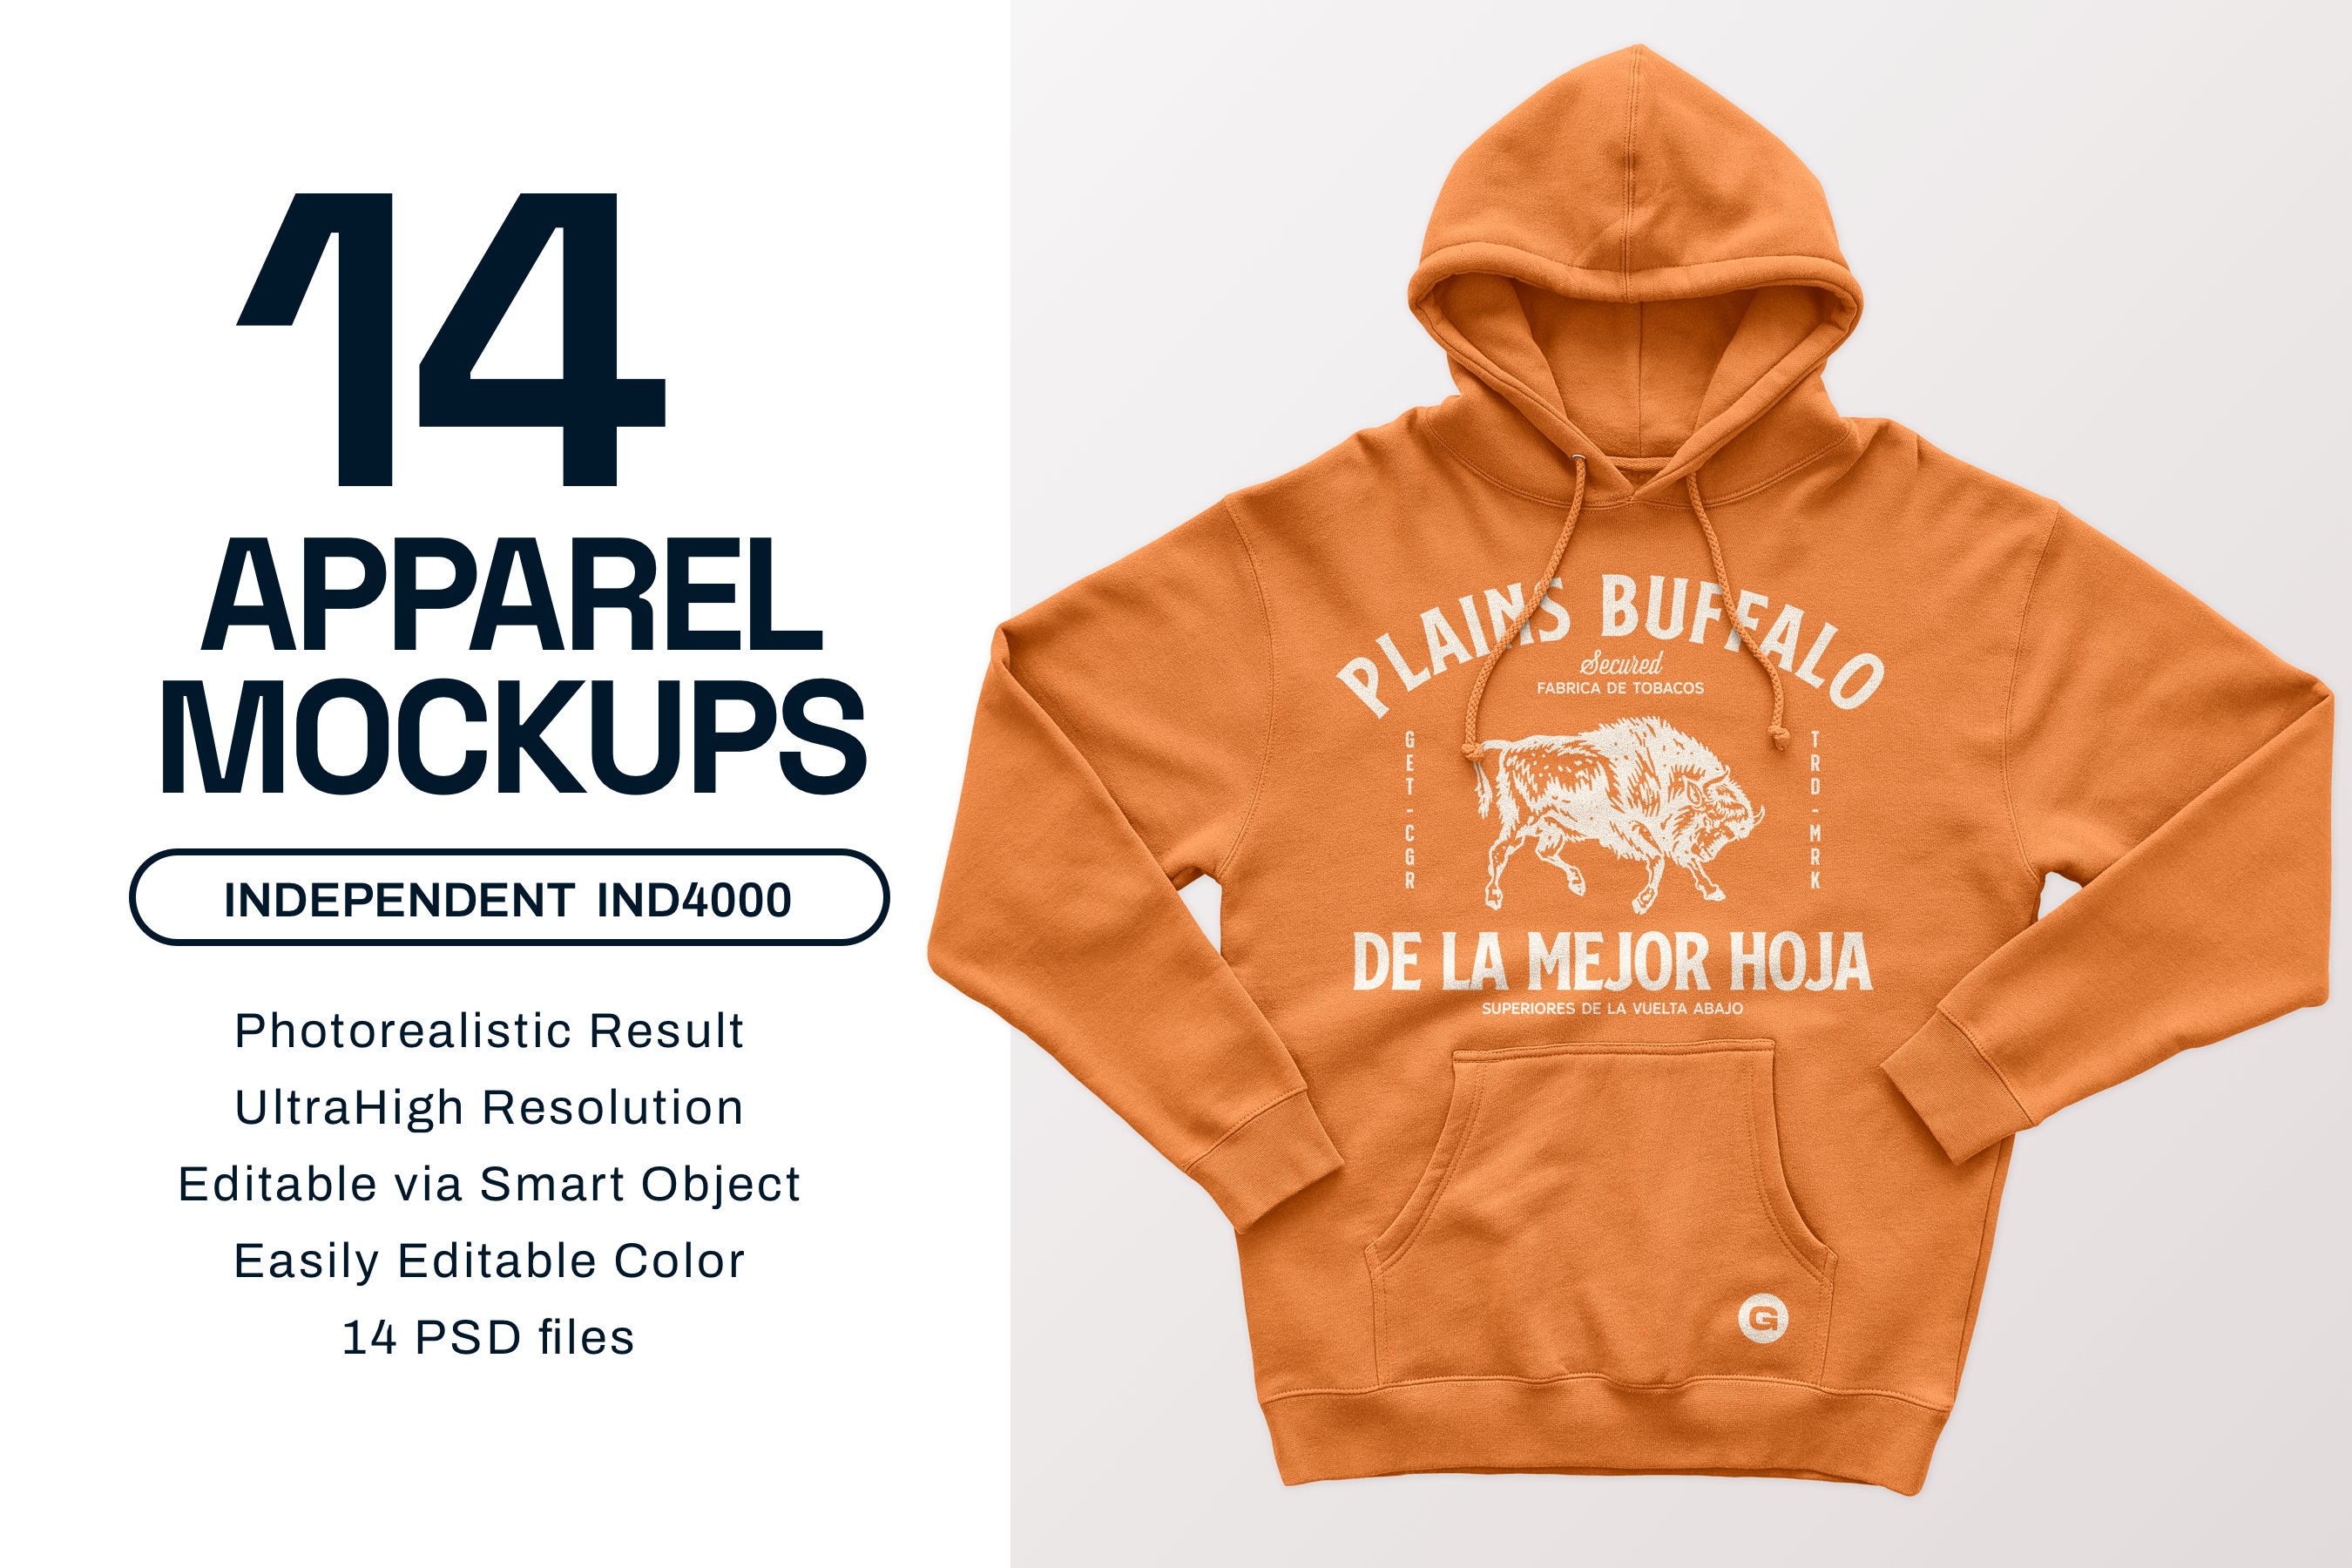 IND4000 Hooded Pullover Mockups cover image.